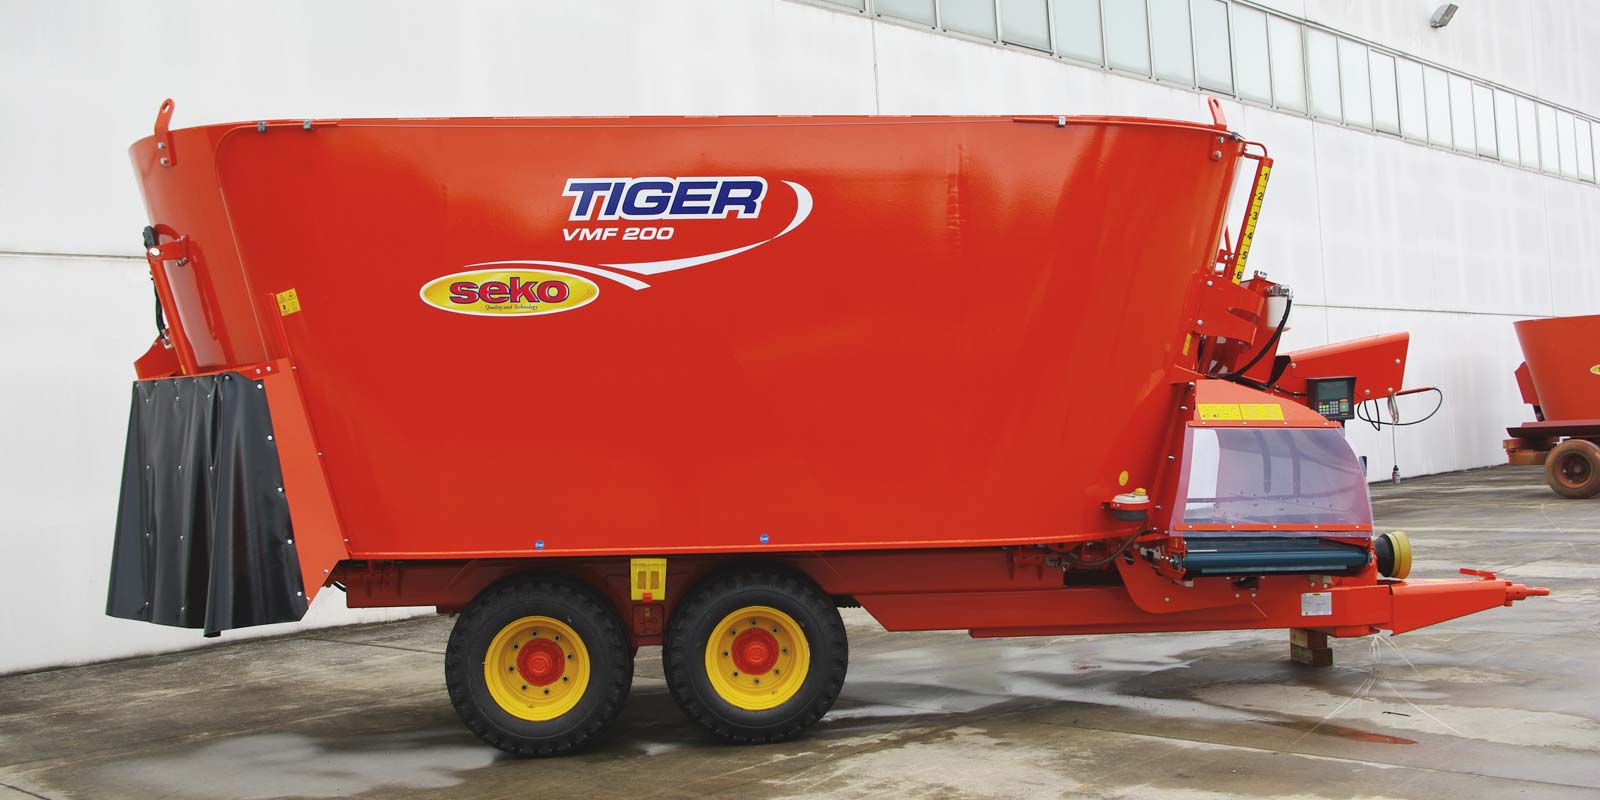 UNIFEED VERTICAL TRAILED MIXING WAGONS